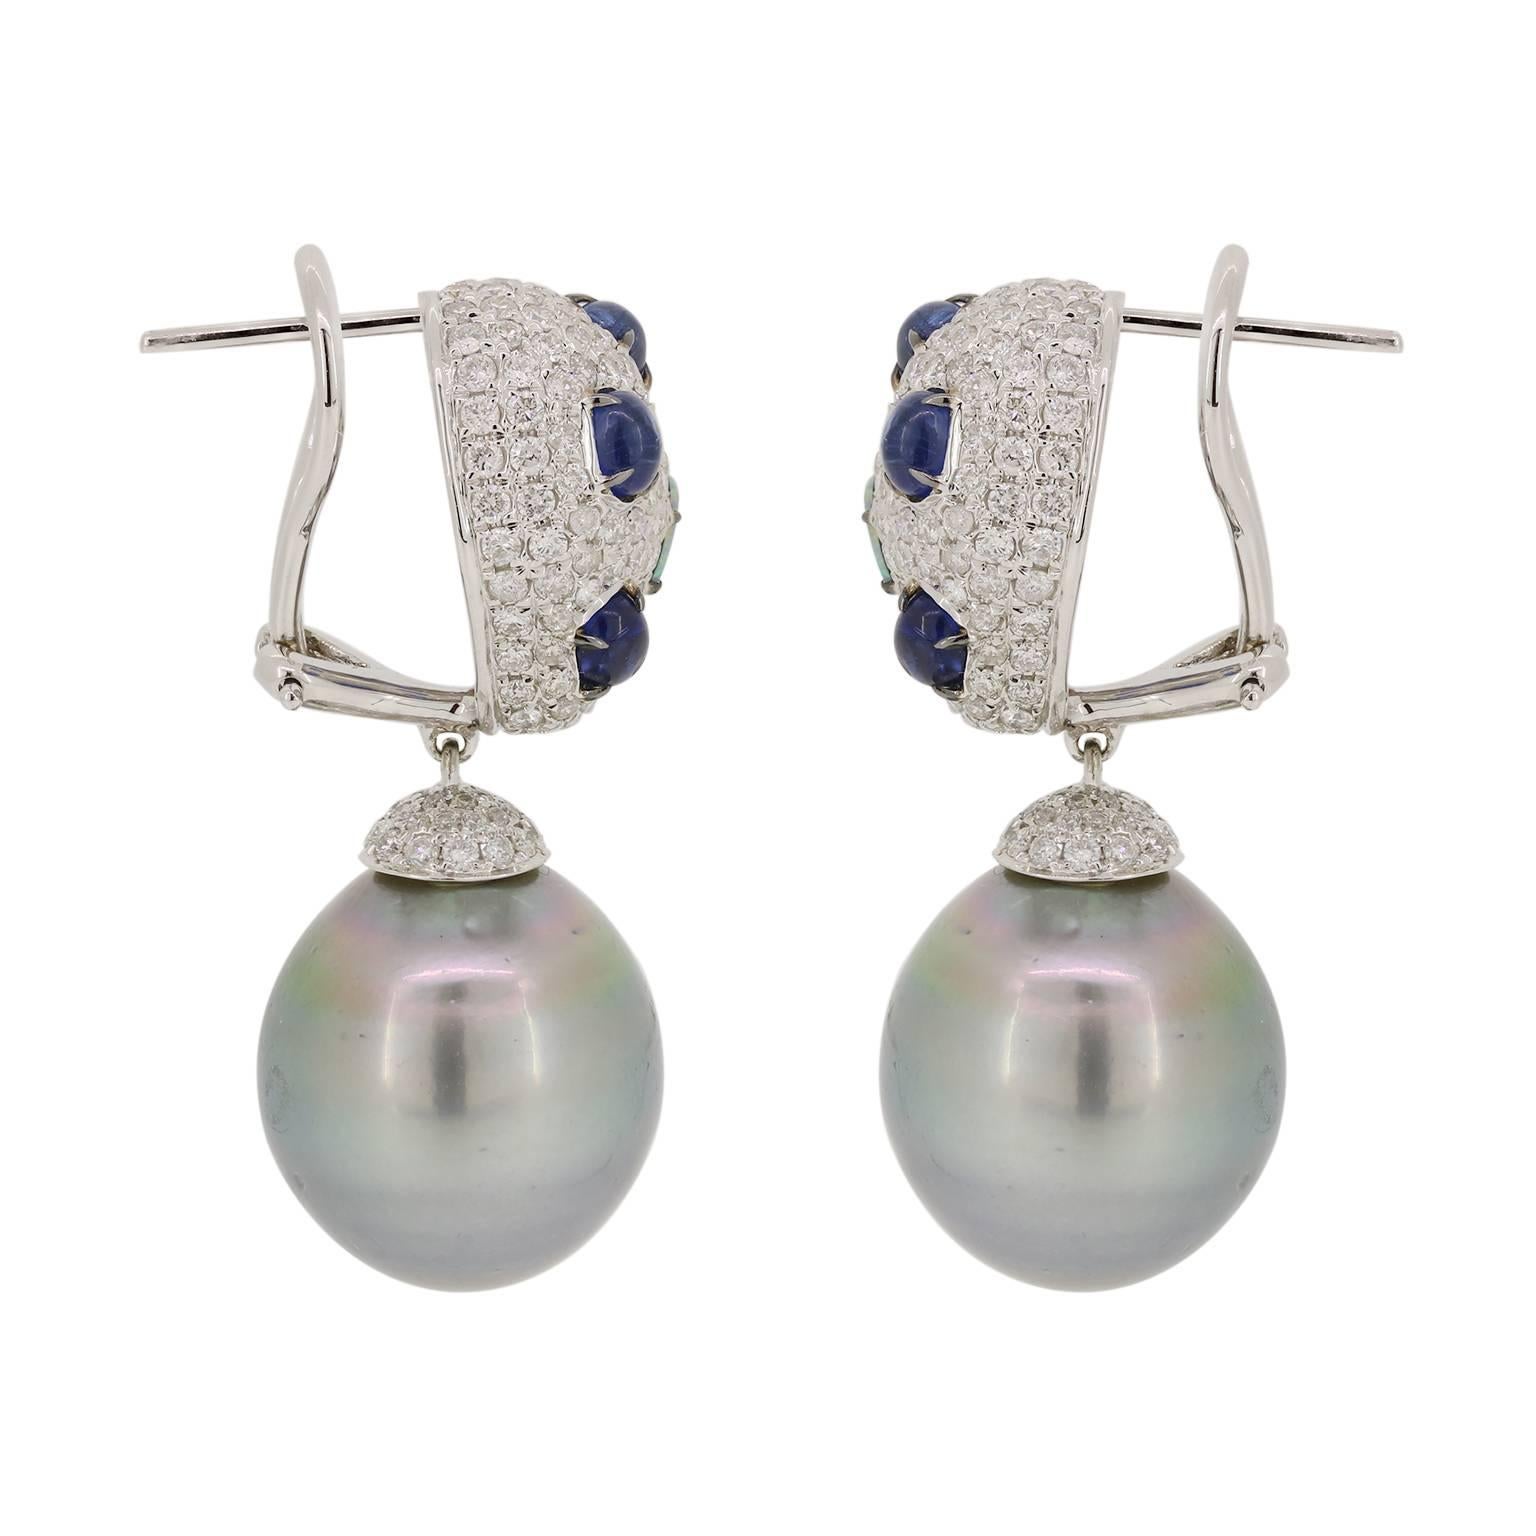 Classic and elegant with a flair!  We have updated the classic pearl drop earring with adding Blue Opal and Kyanite to a white diamond pave top for a unique twist. These are finished off with a gray Tahitian pearl drop (15mm) with a white diamond